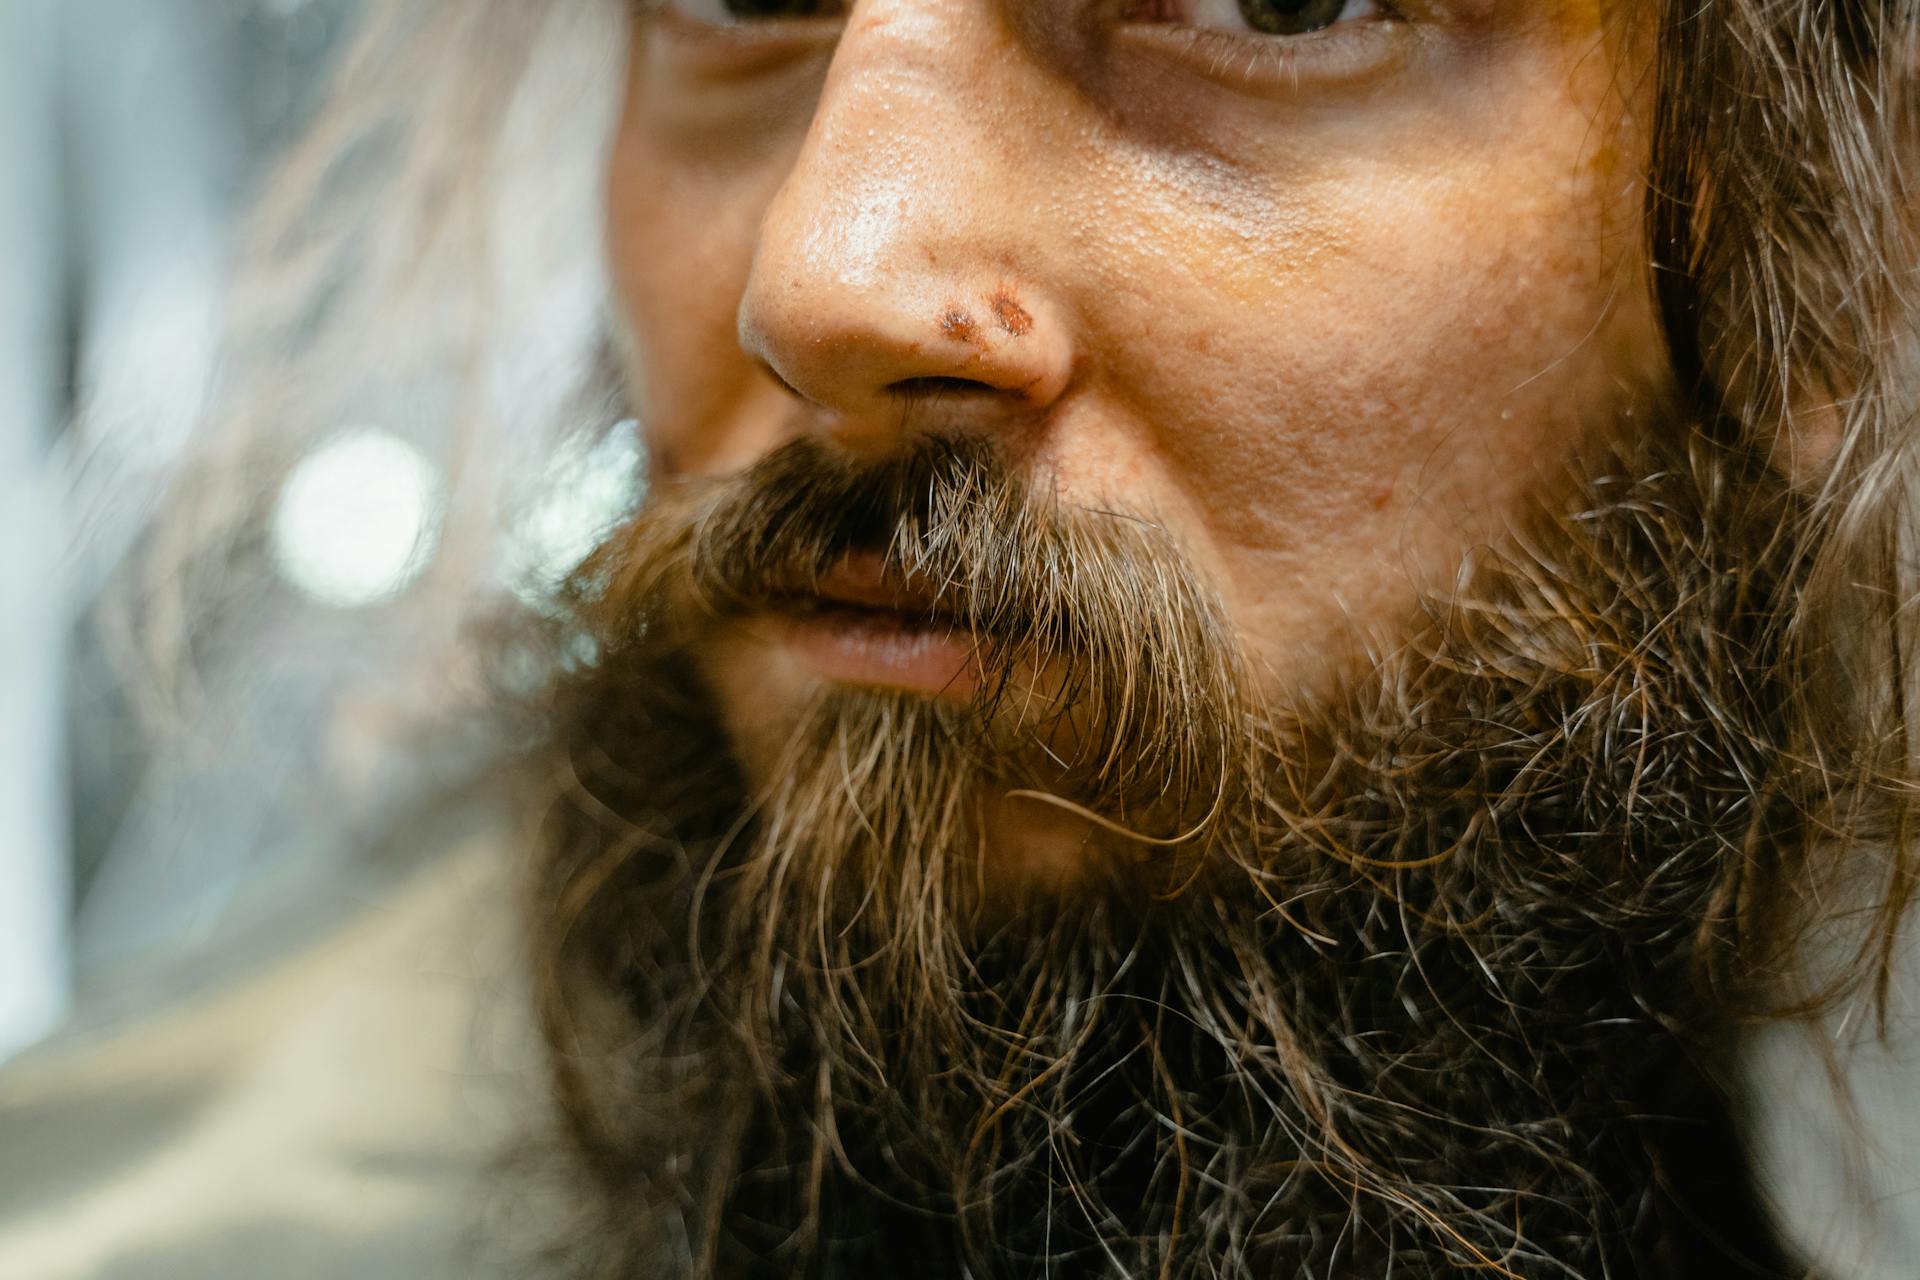 A close-up of a man with a beard | Source: Pexels